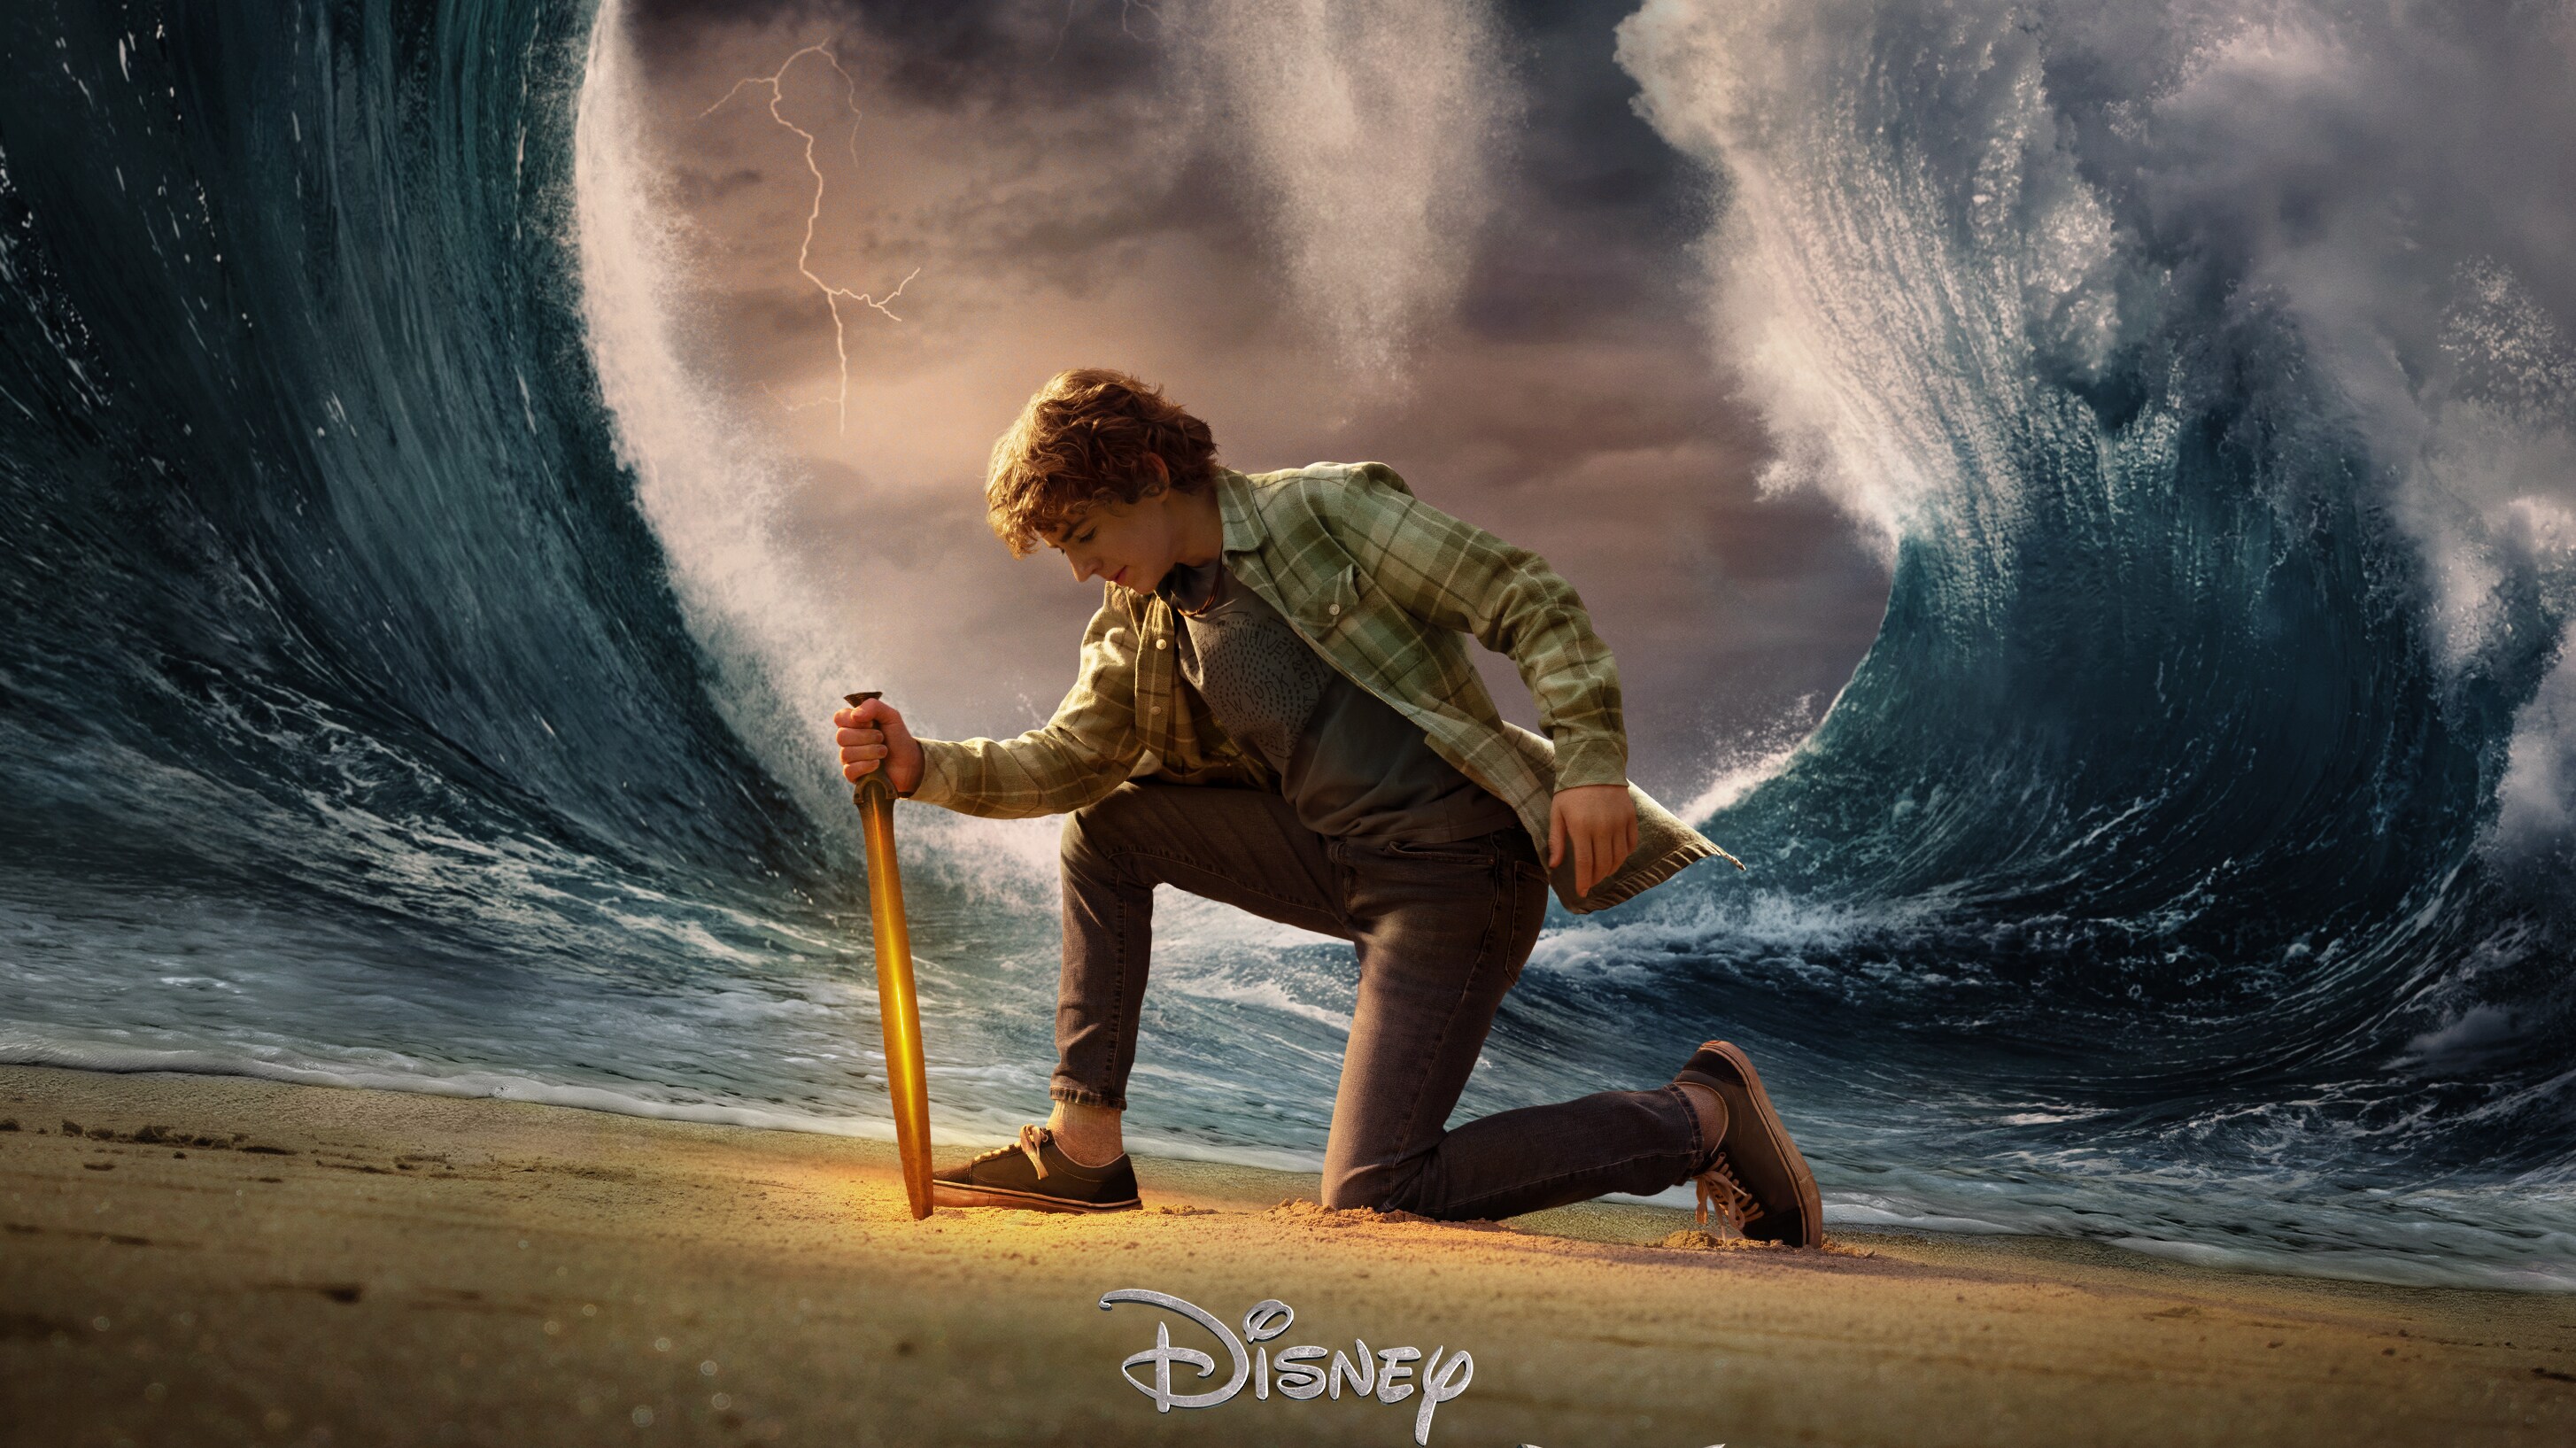 DISNEY+ SHARES NEW TEASER TRAILER AND IMAGES FOR  ‘PERCY JACKSON AND THE OLYMPIANS’